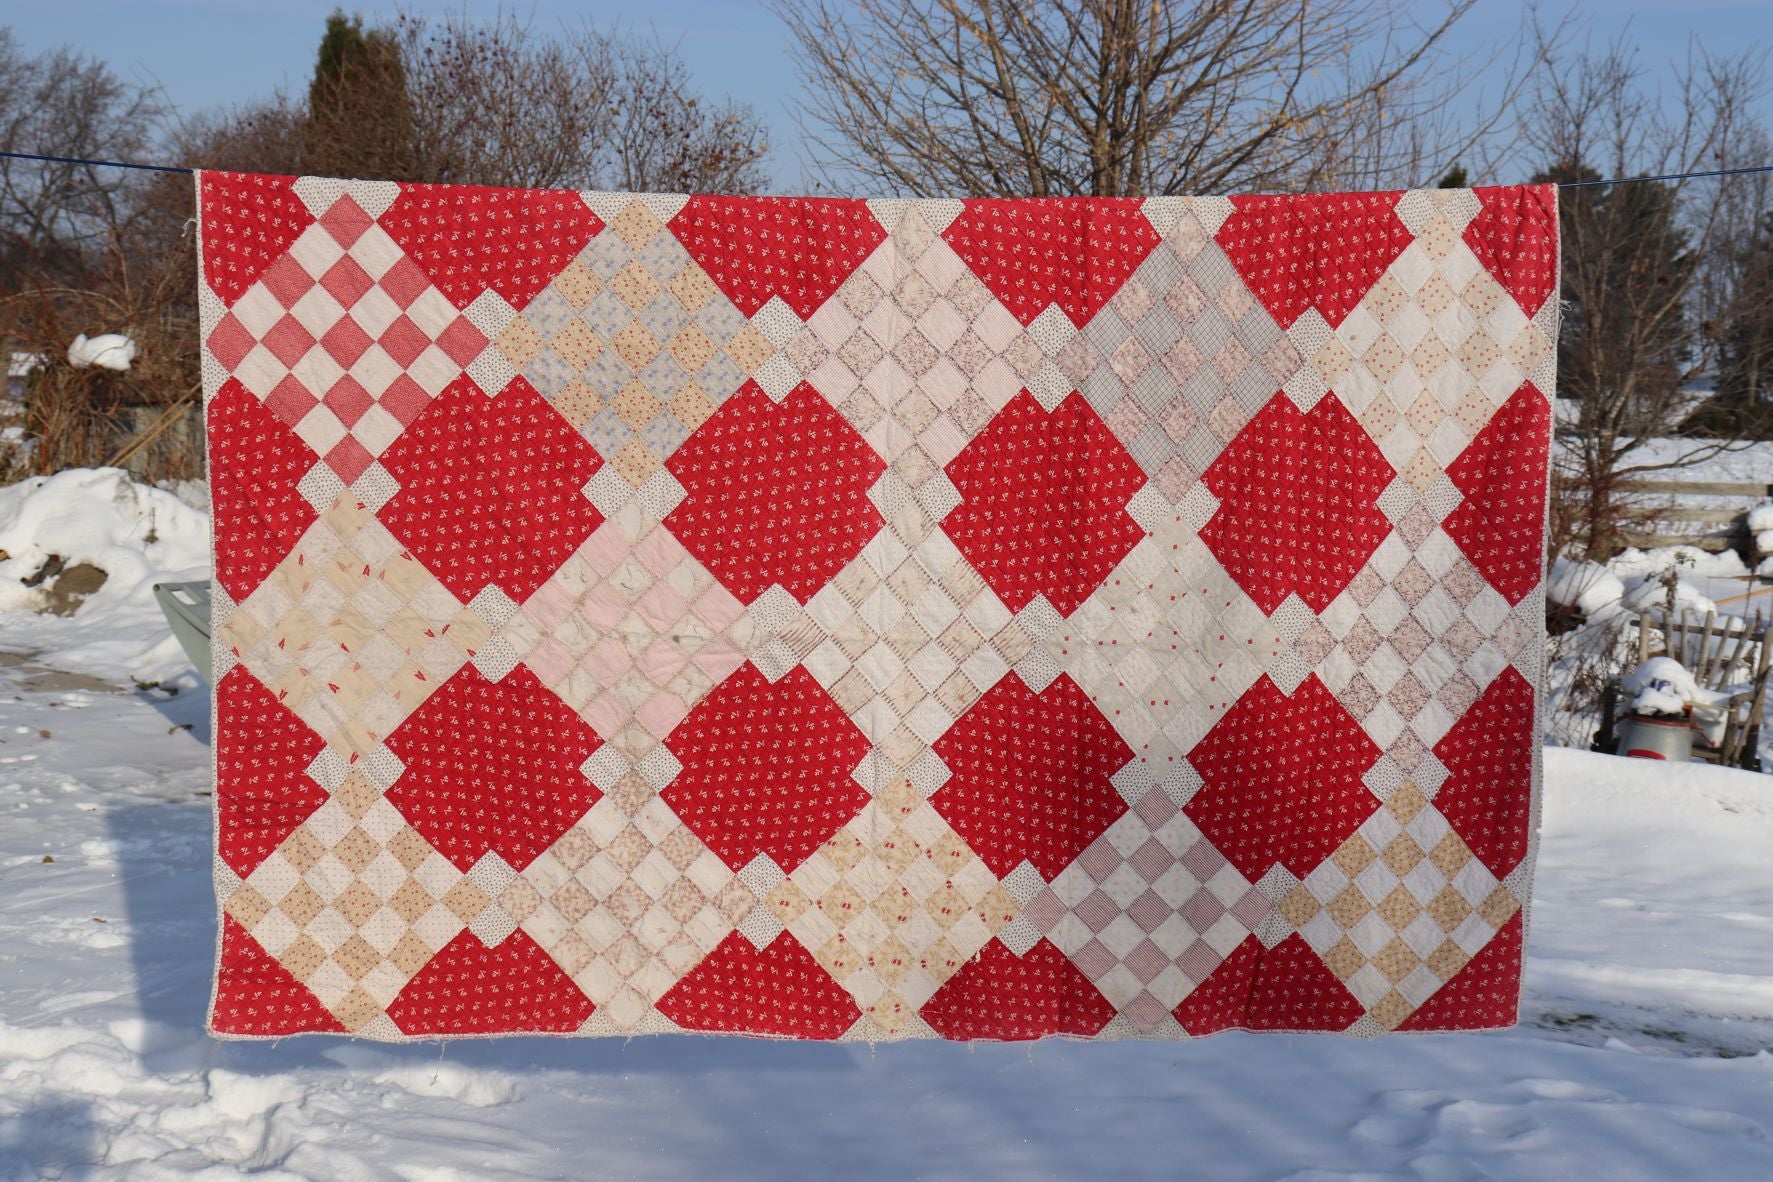 Vintage Quilt With Reds